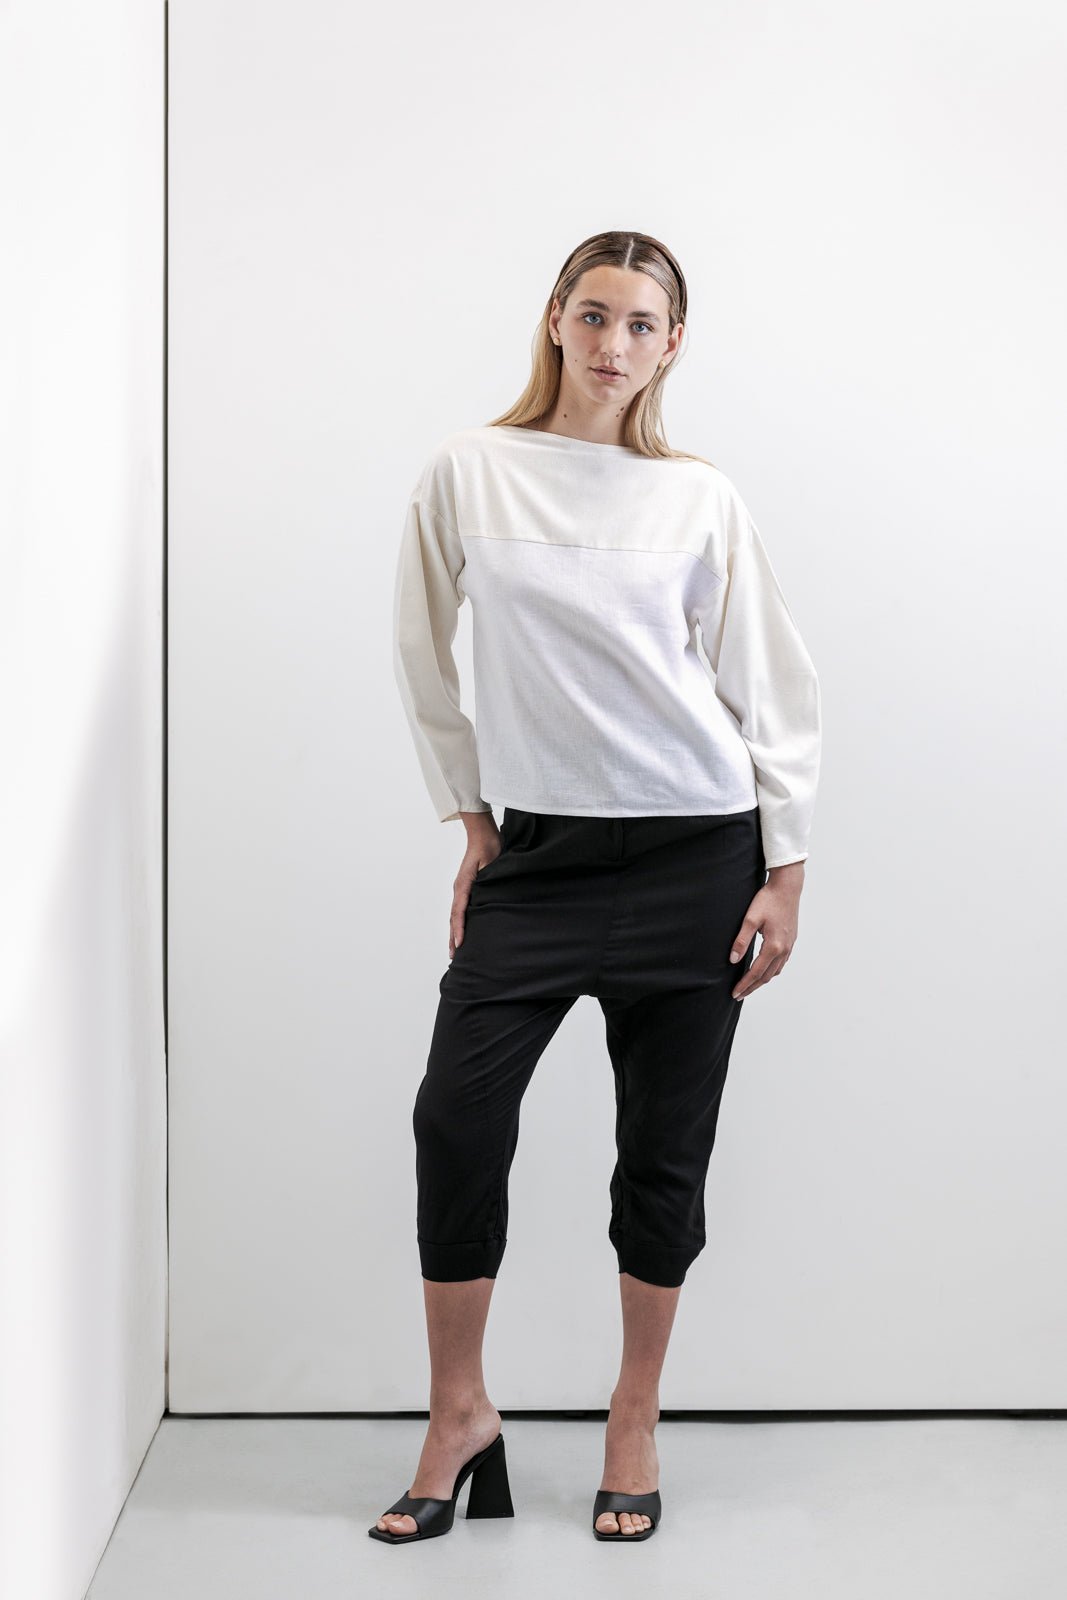 Dolomite Top - VOUS Contemporary Clothing